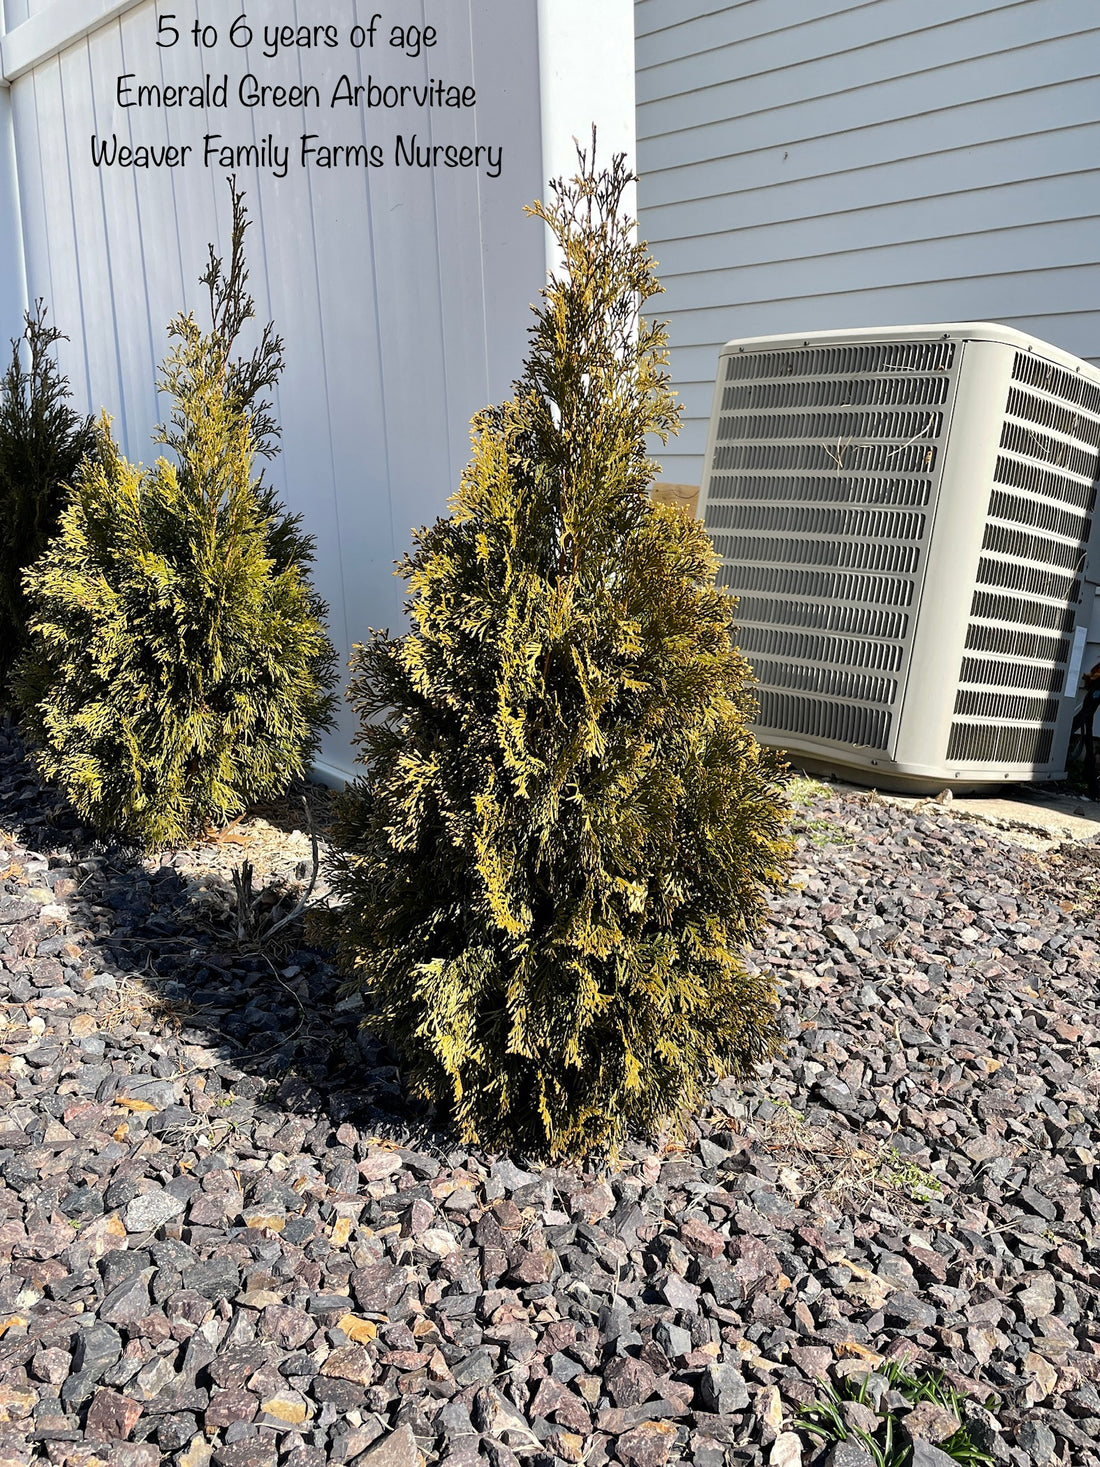 How Big Is A 5 to 6 Year Old Emerald Green Arborvitae?